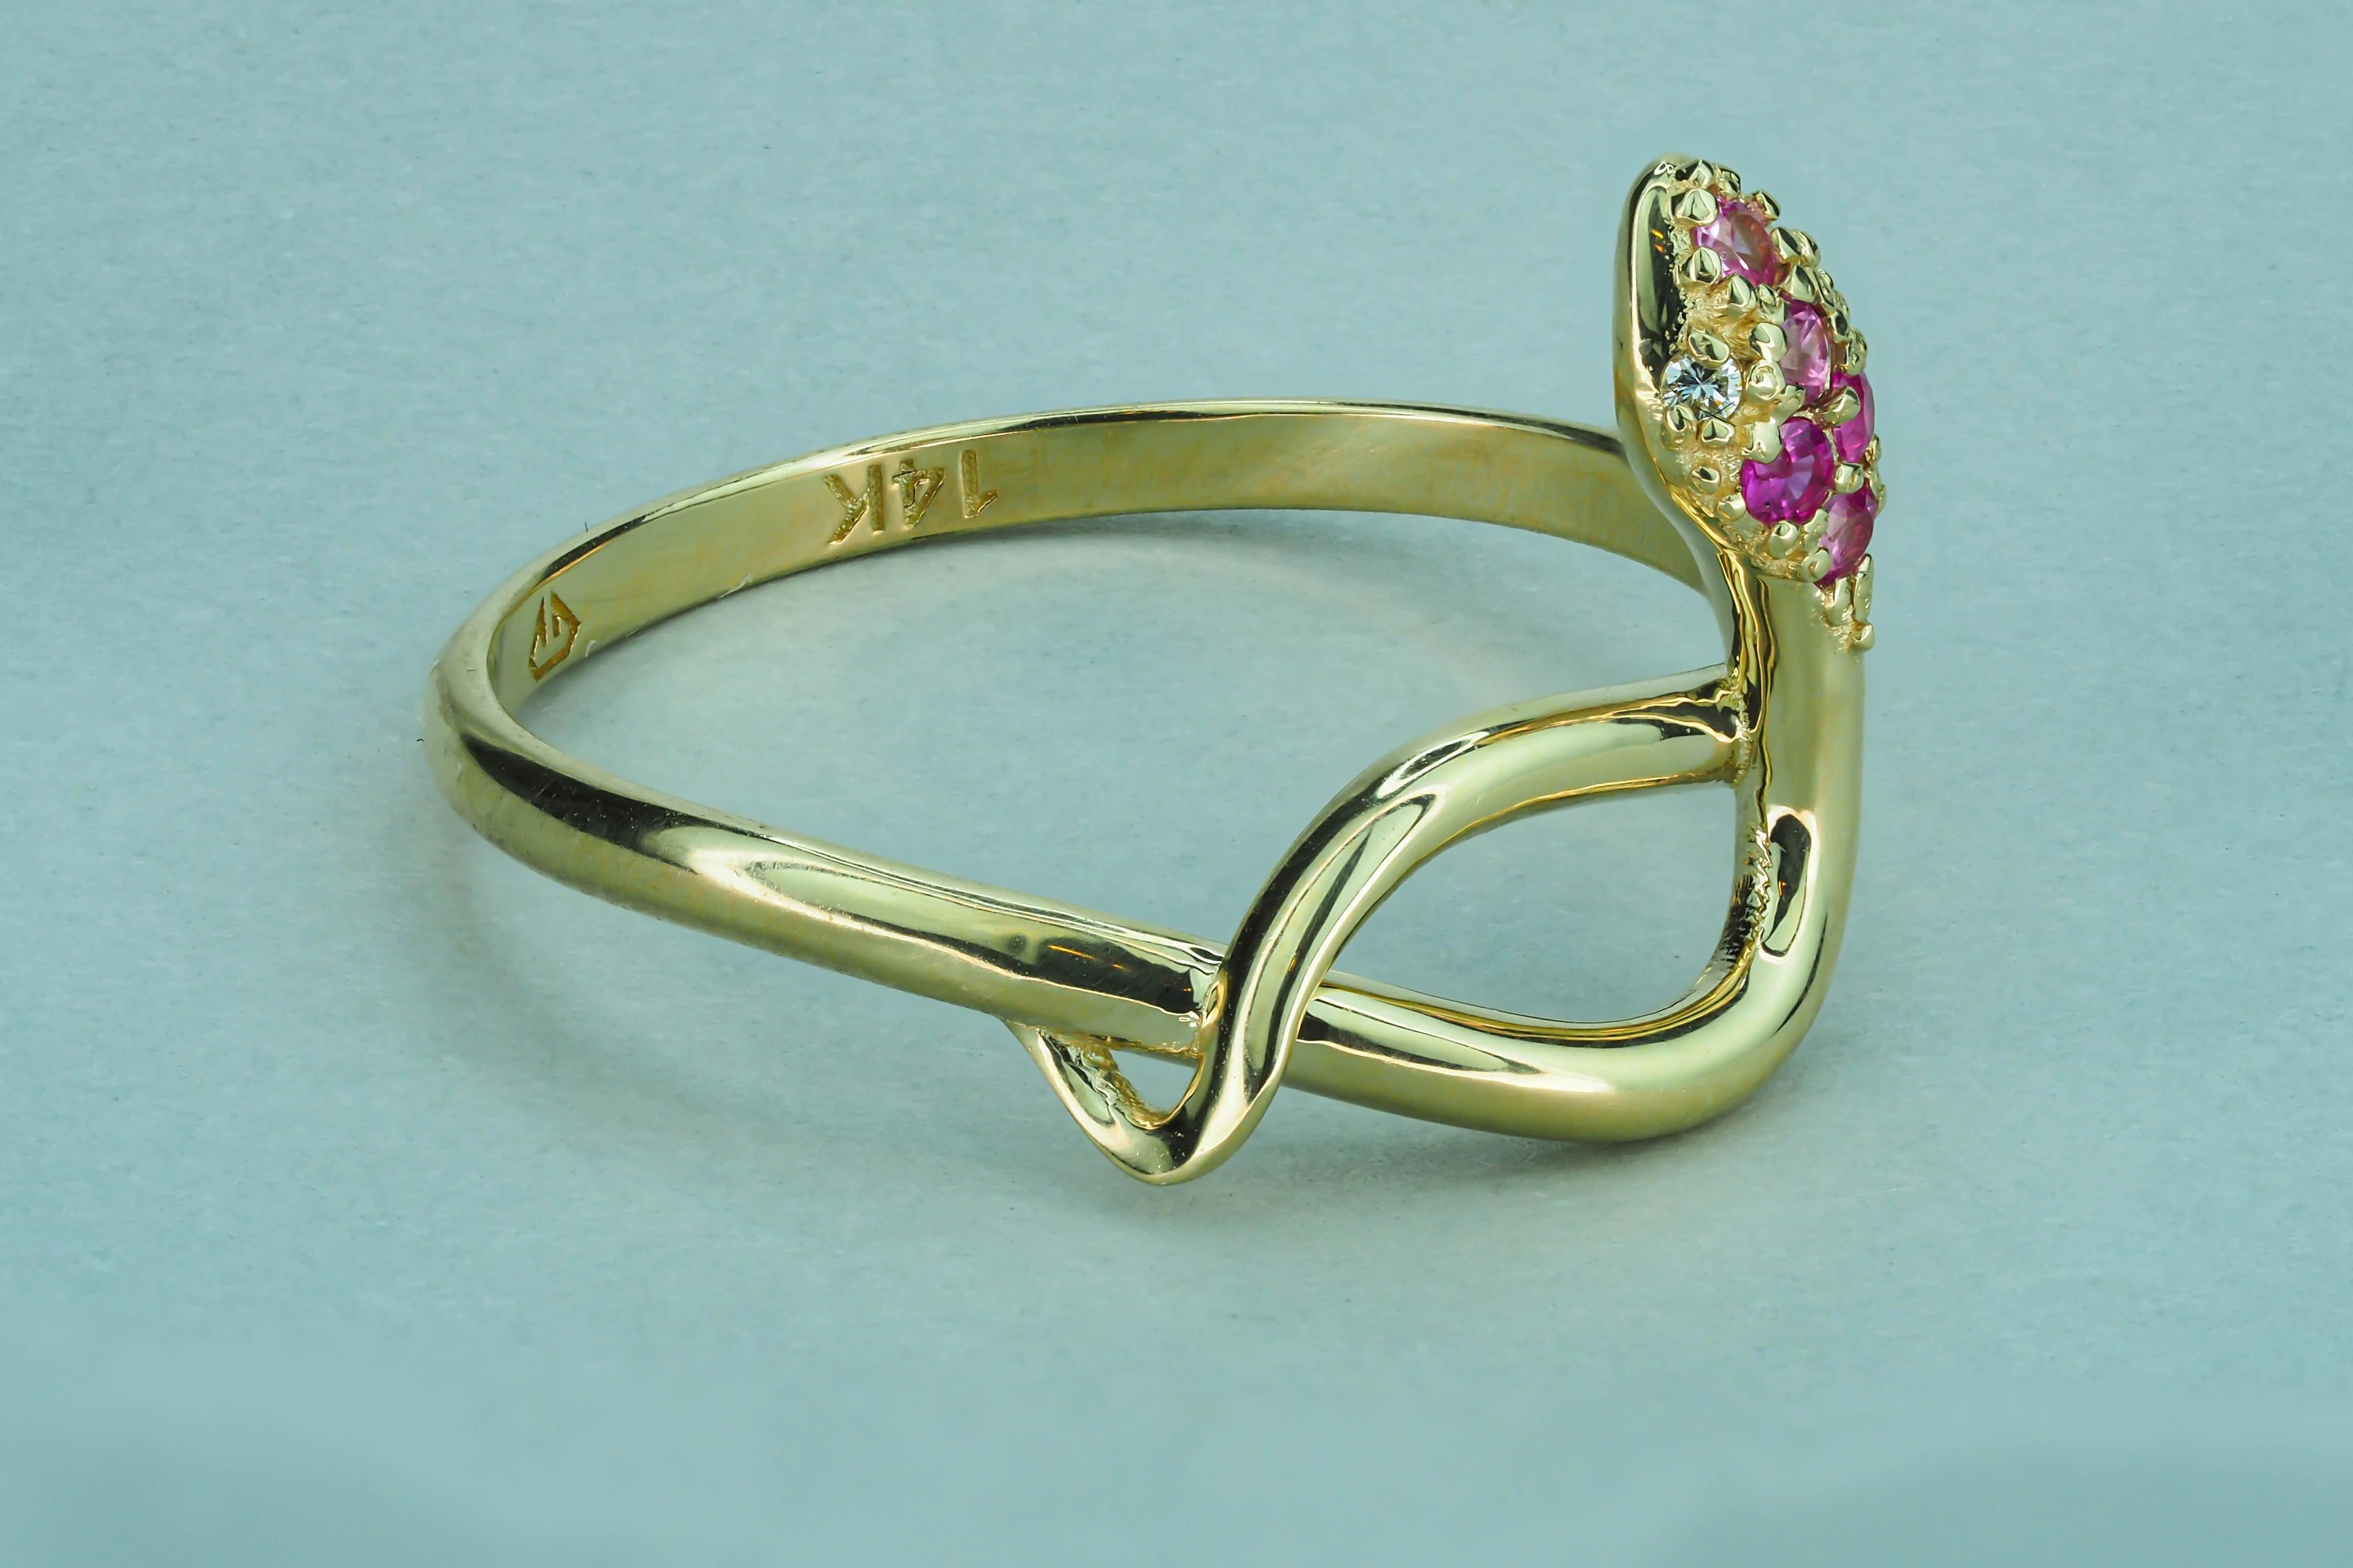 Women's Snake Ring With Sapphires, Diamonds in 14k gold.  For Sale